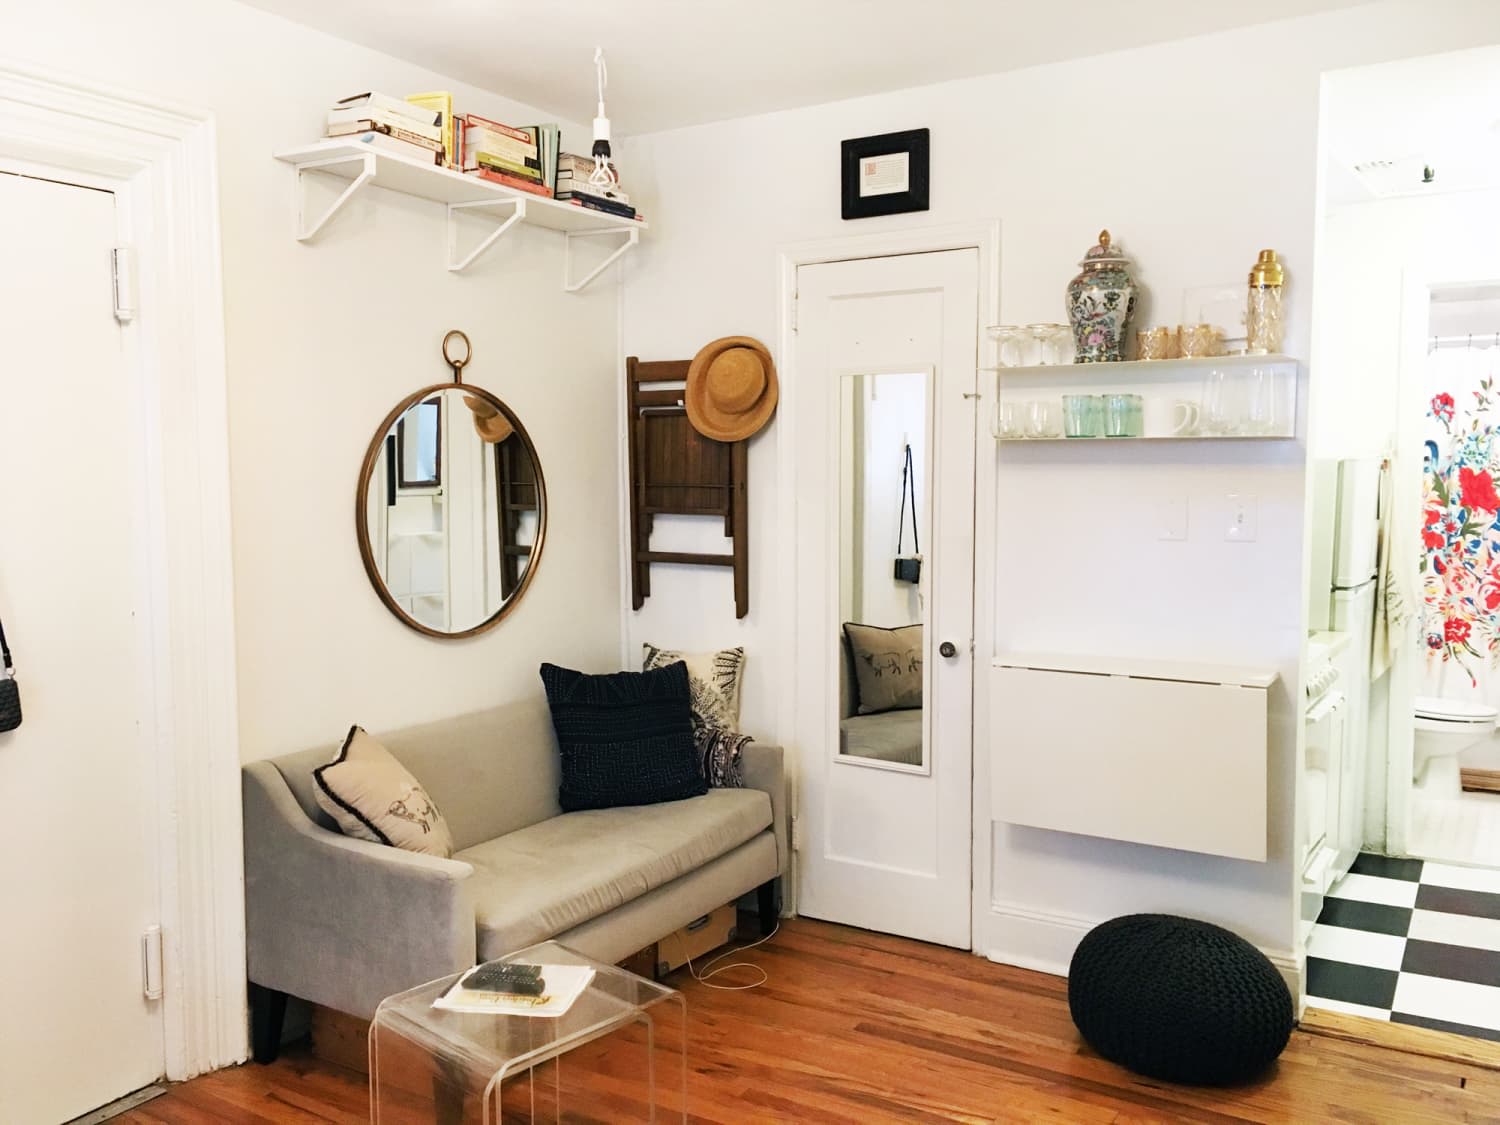 A Teeny 225-Square-Foot Studio Has All the Small Space-Saving Solutions